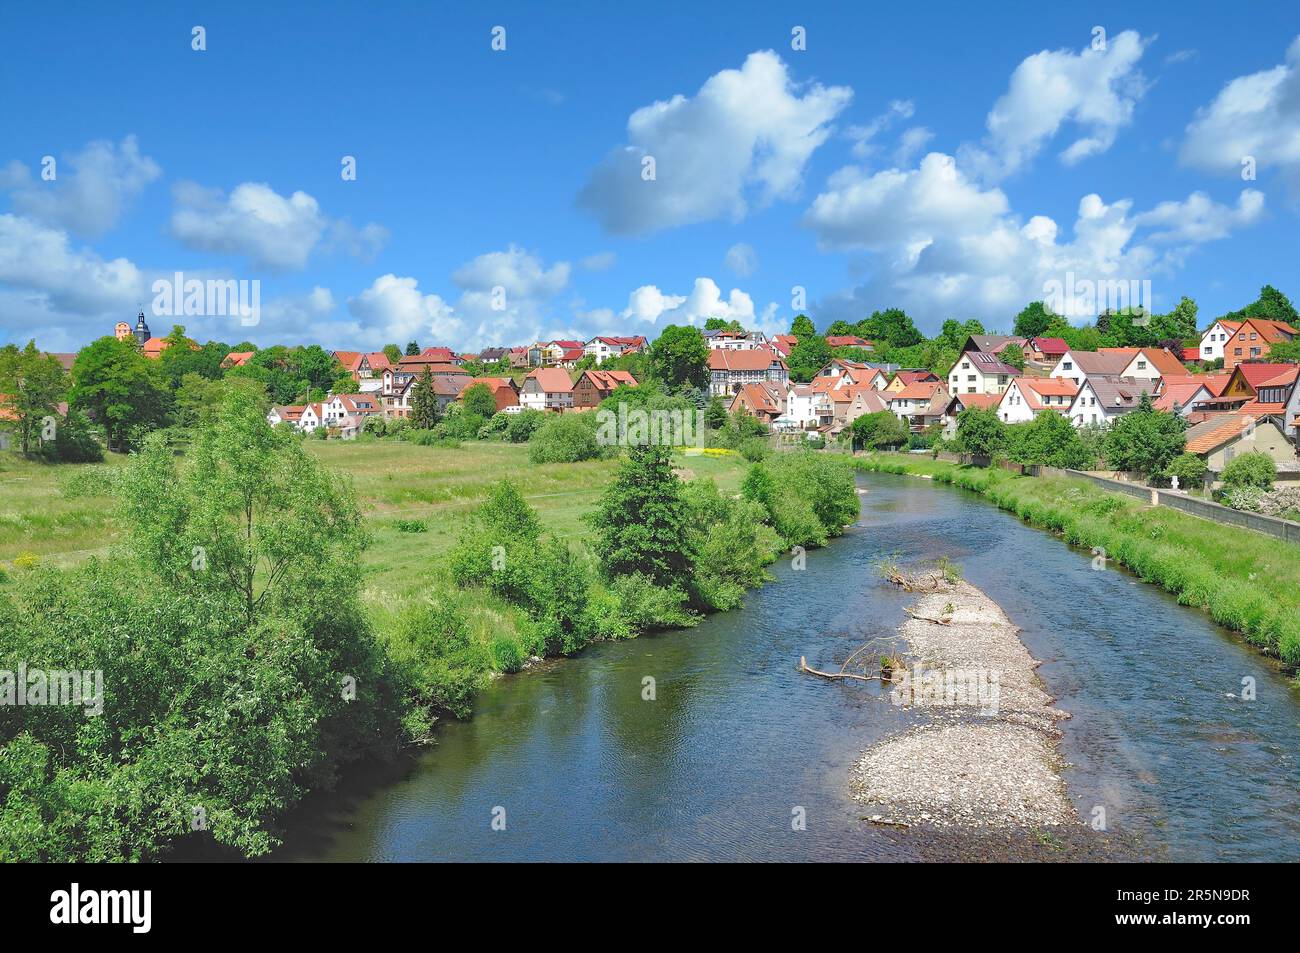 View of Breitungen on the Werra, Thuringia, Germany Stock Photo